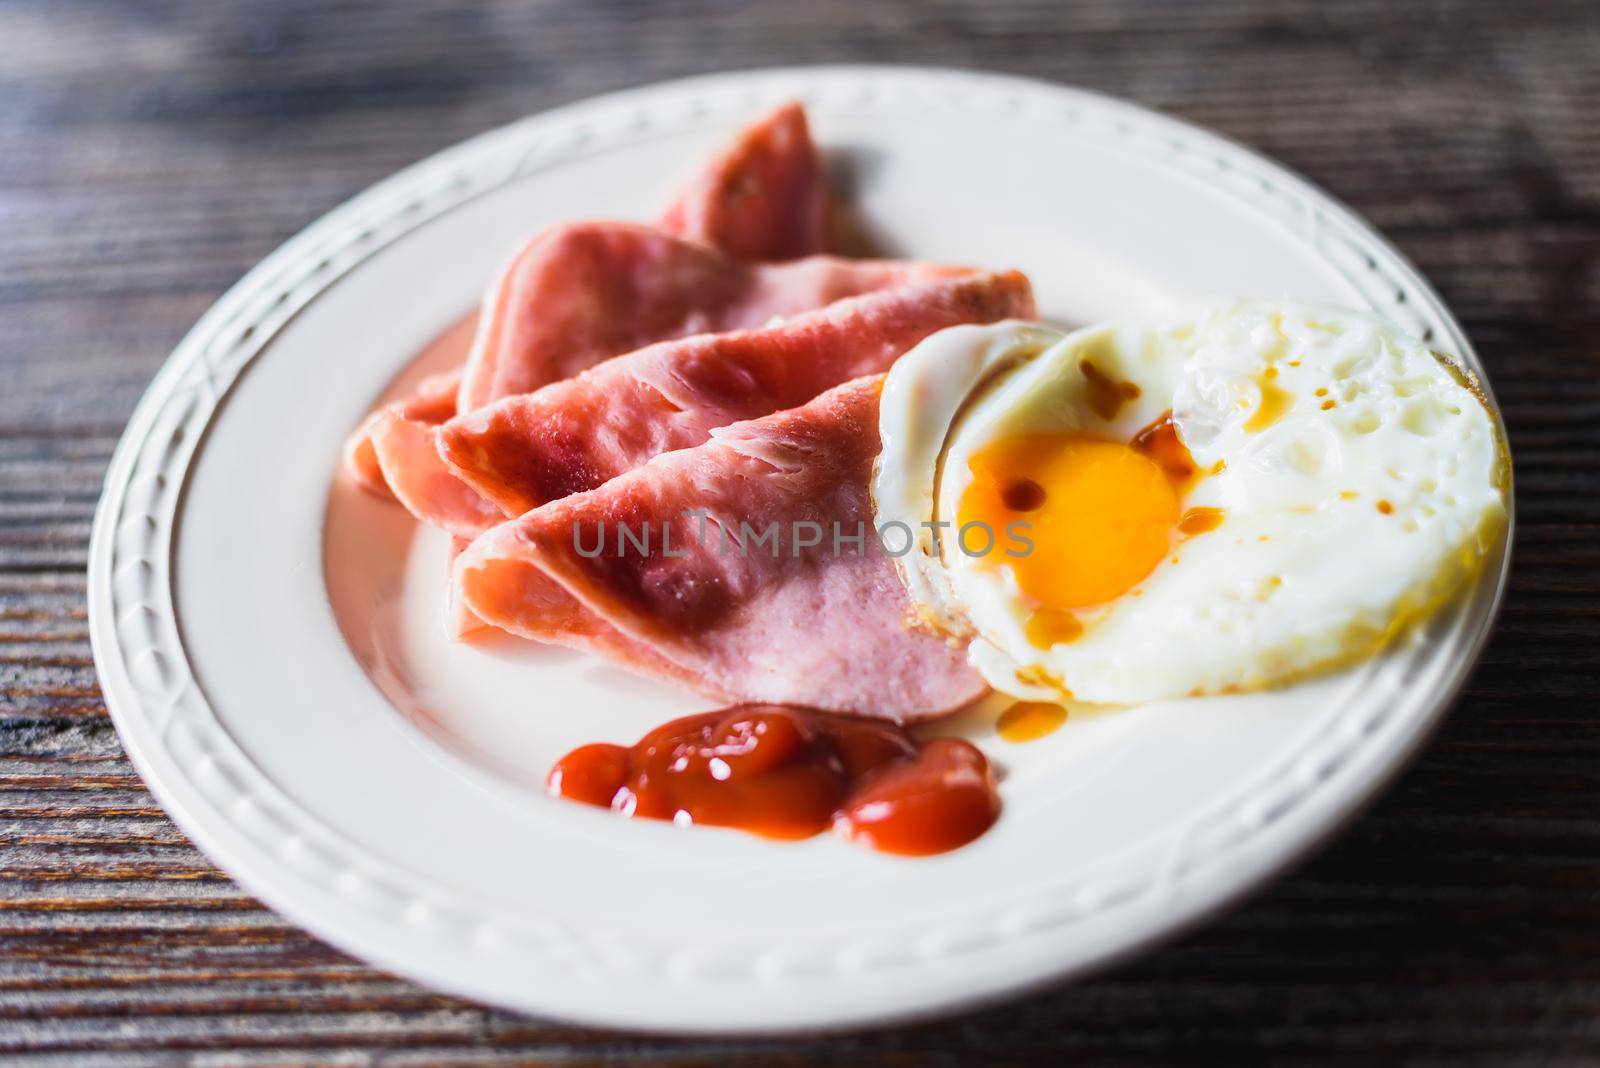 Fried Eggs and ham on a dish by Wmpix